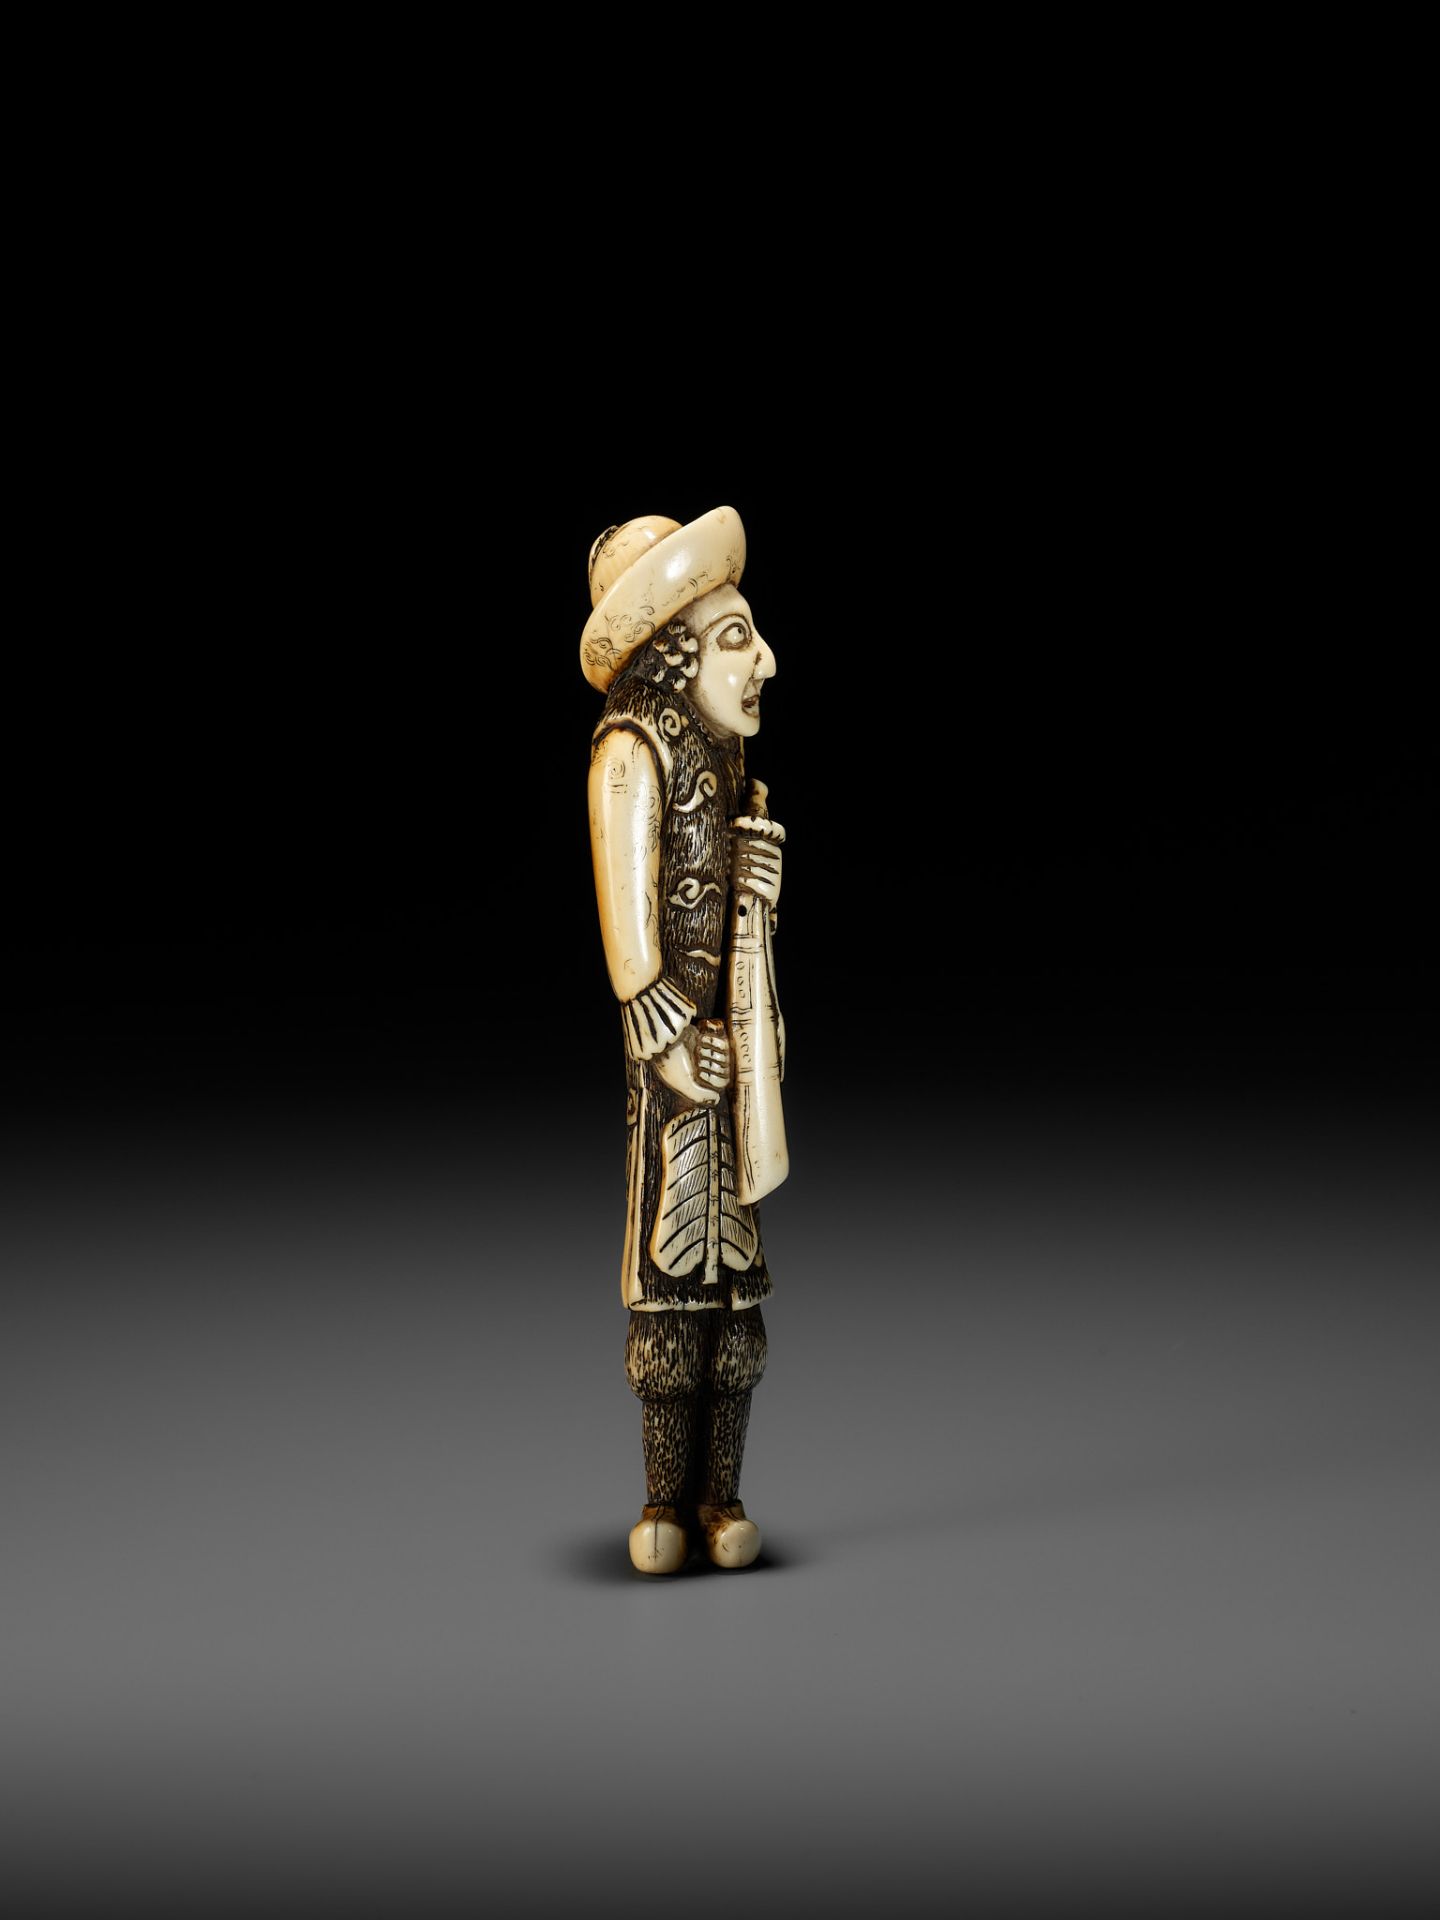 A SUPERB AND LARGE IVORY NETSUKE OF A DUTCHMAN WITH A TRUMPET - Image 12 of 21